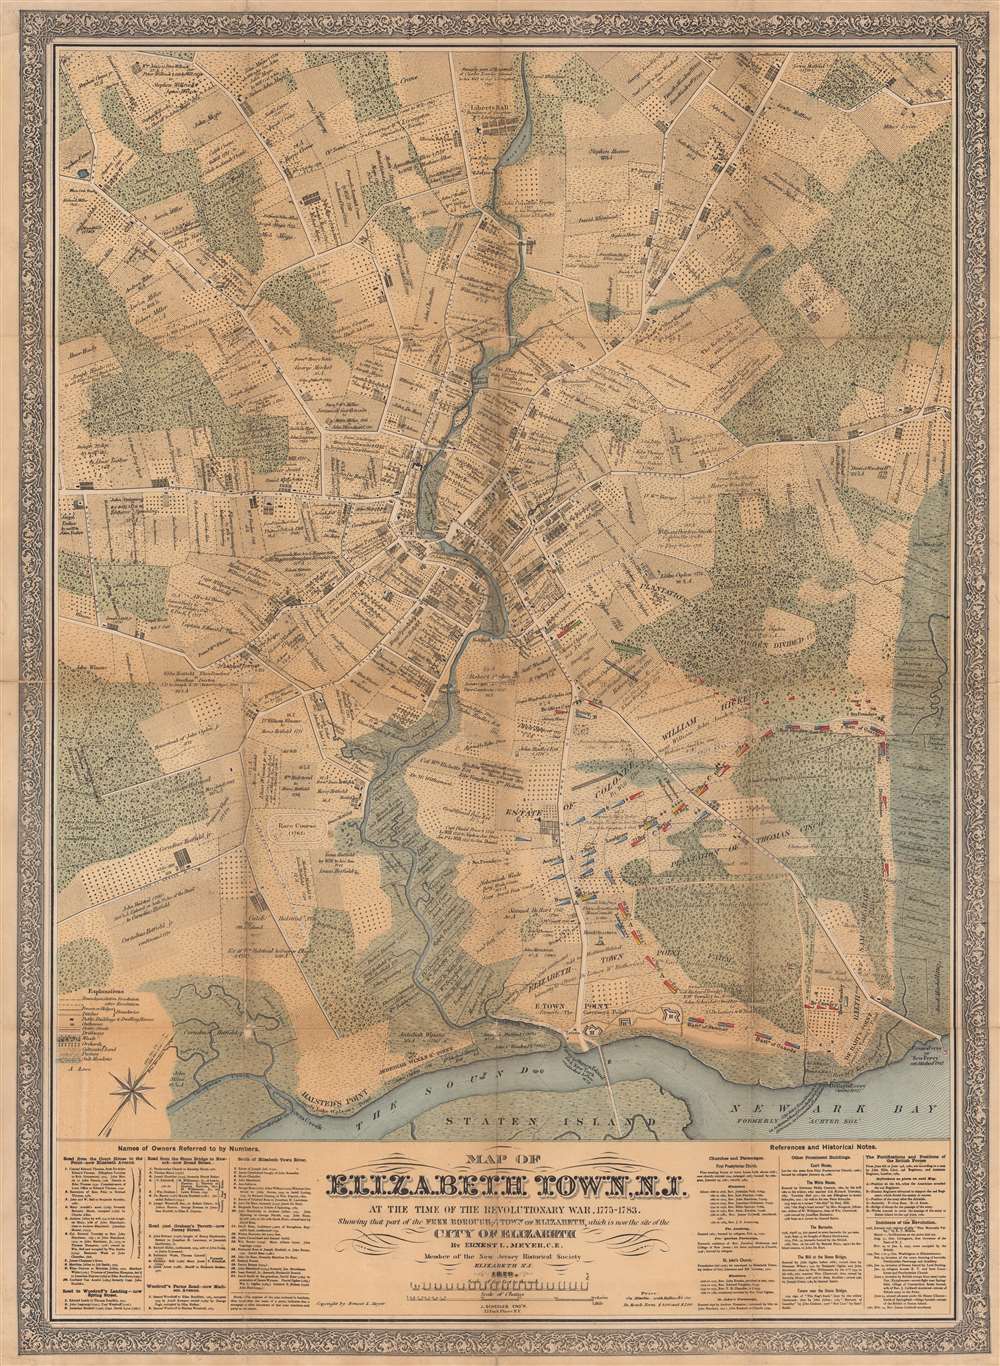 Map of Elizabethtown, N.J. at the Time of the Revolutionary War, 1775 - 1783. Showing that part of the Free Borough and Town of Elizabeth, which is now the site of the City of Elizabeth. - Main View